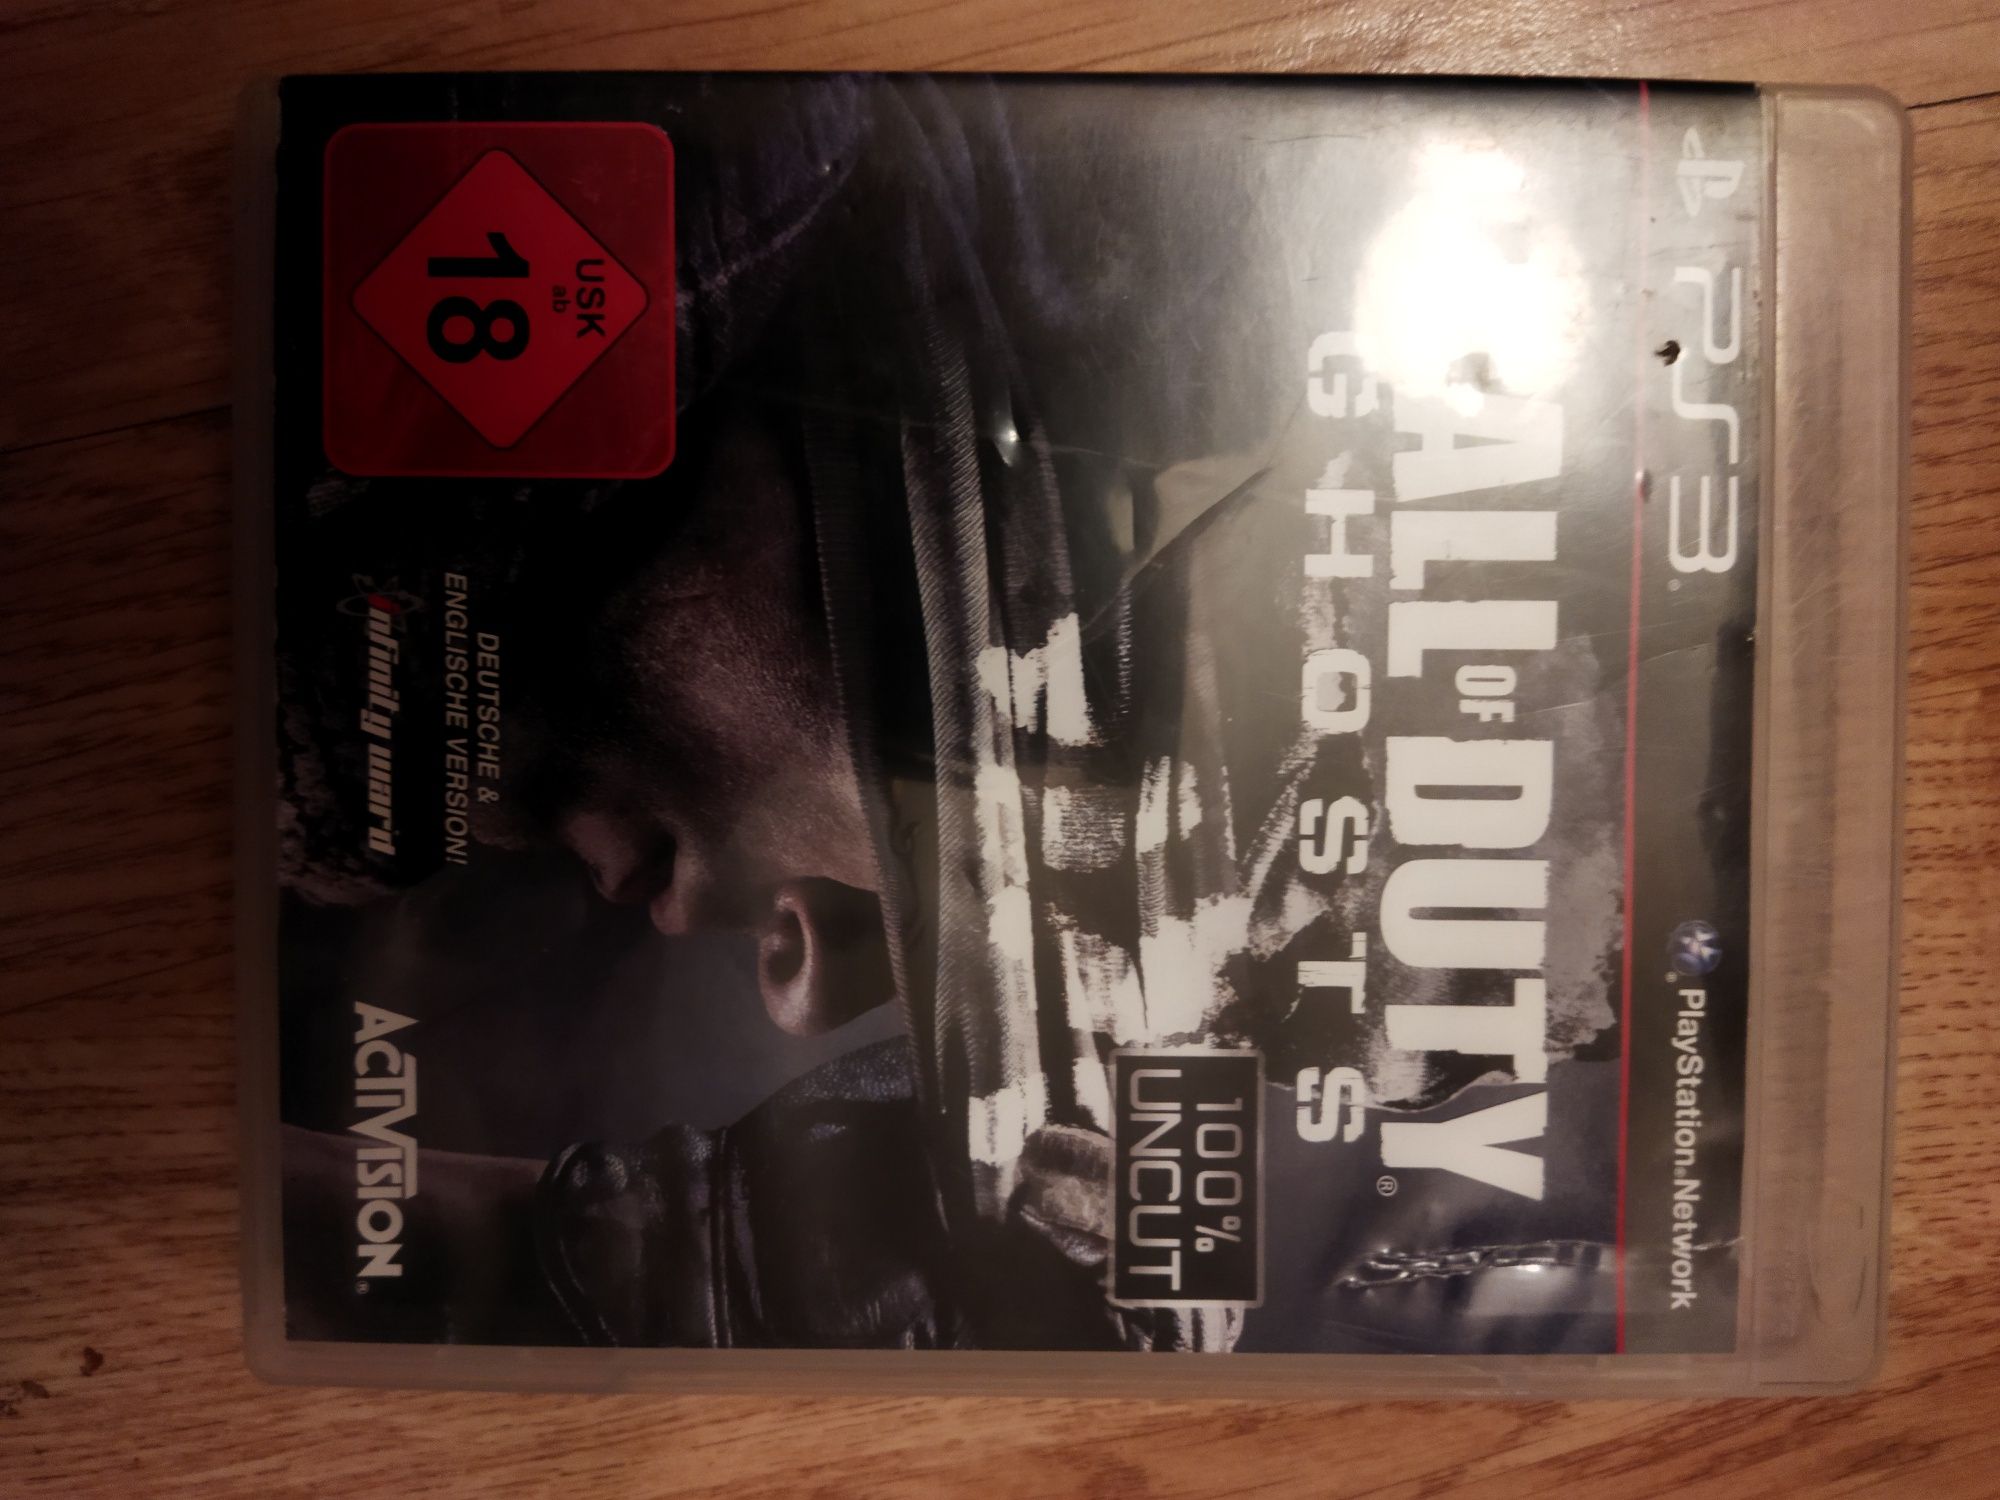 Call of duty ghost na konsole PlayStation 3 ps3